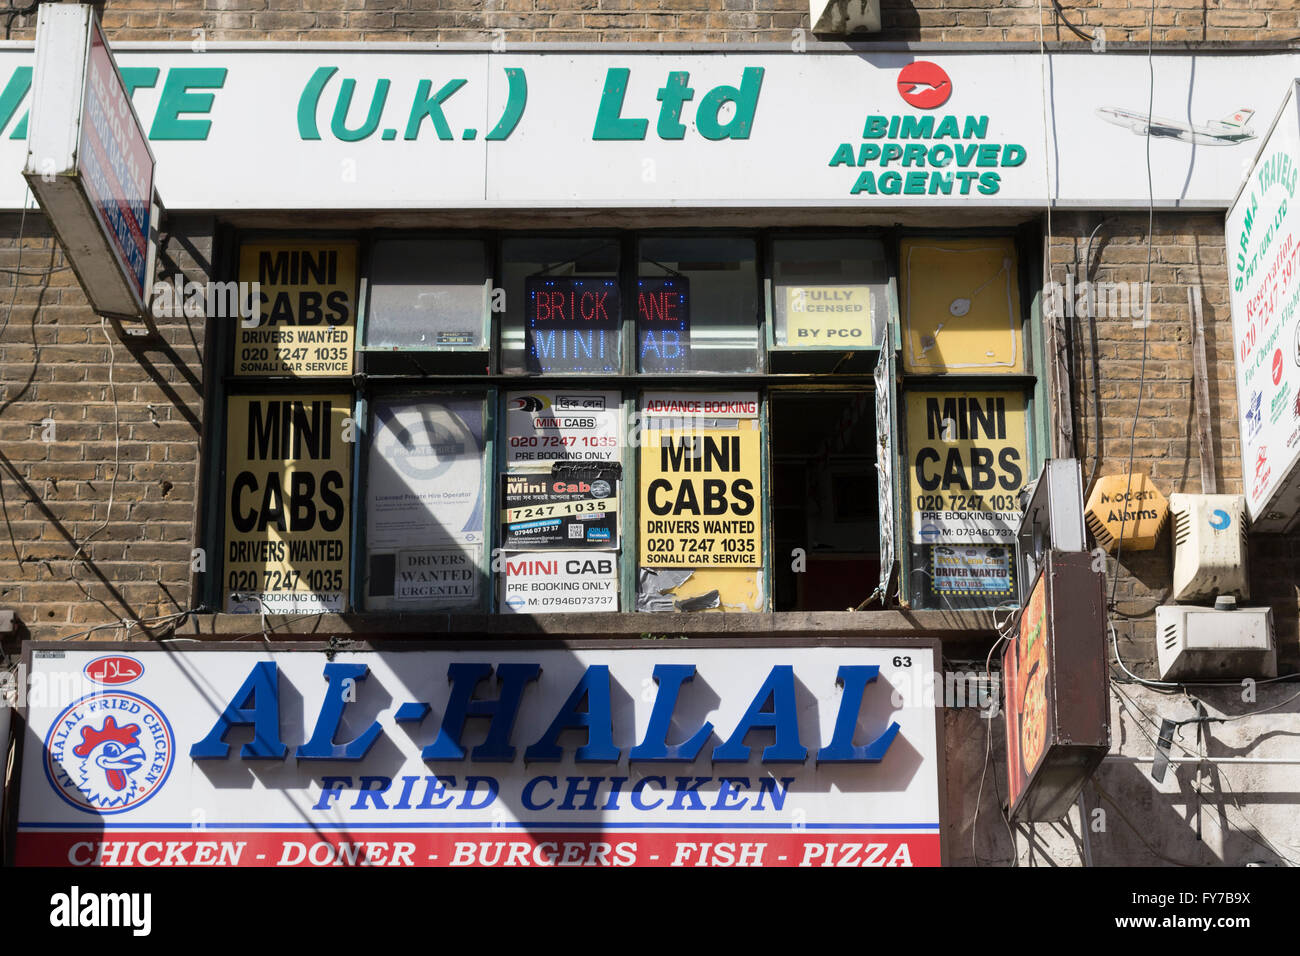 Mini Cabs and Al-Halal Fried Chicken advertising in London's Brick lane Stock Photo